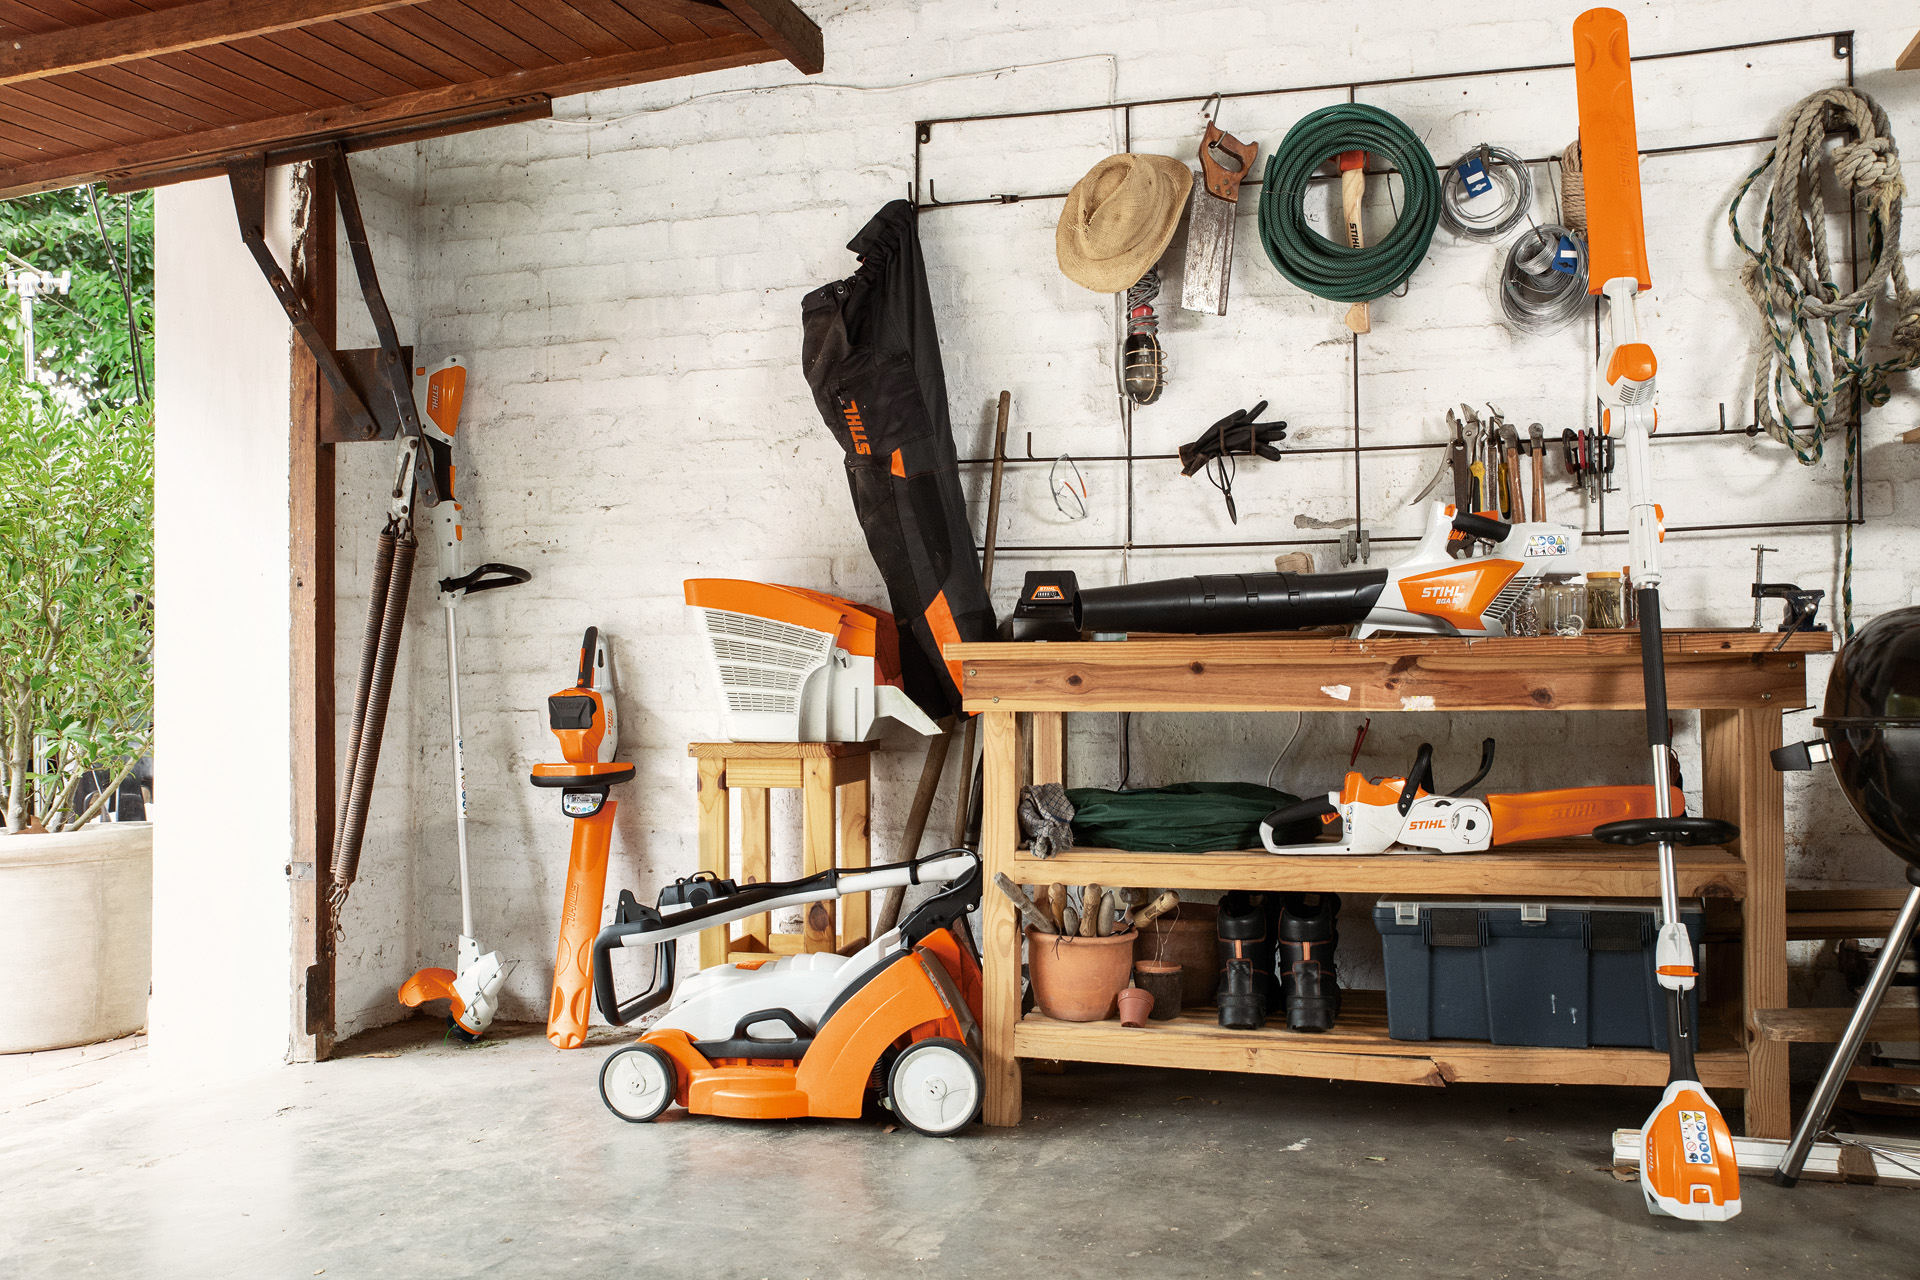 A garage interior with a wide range of STIHL products including an FSA 56 cordless grass trimmer.